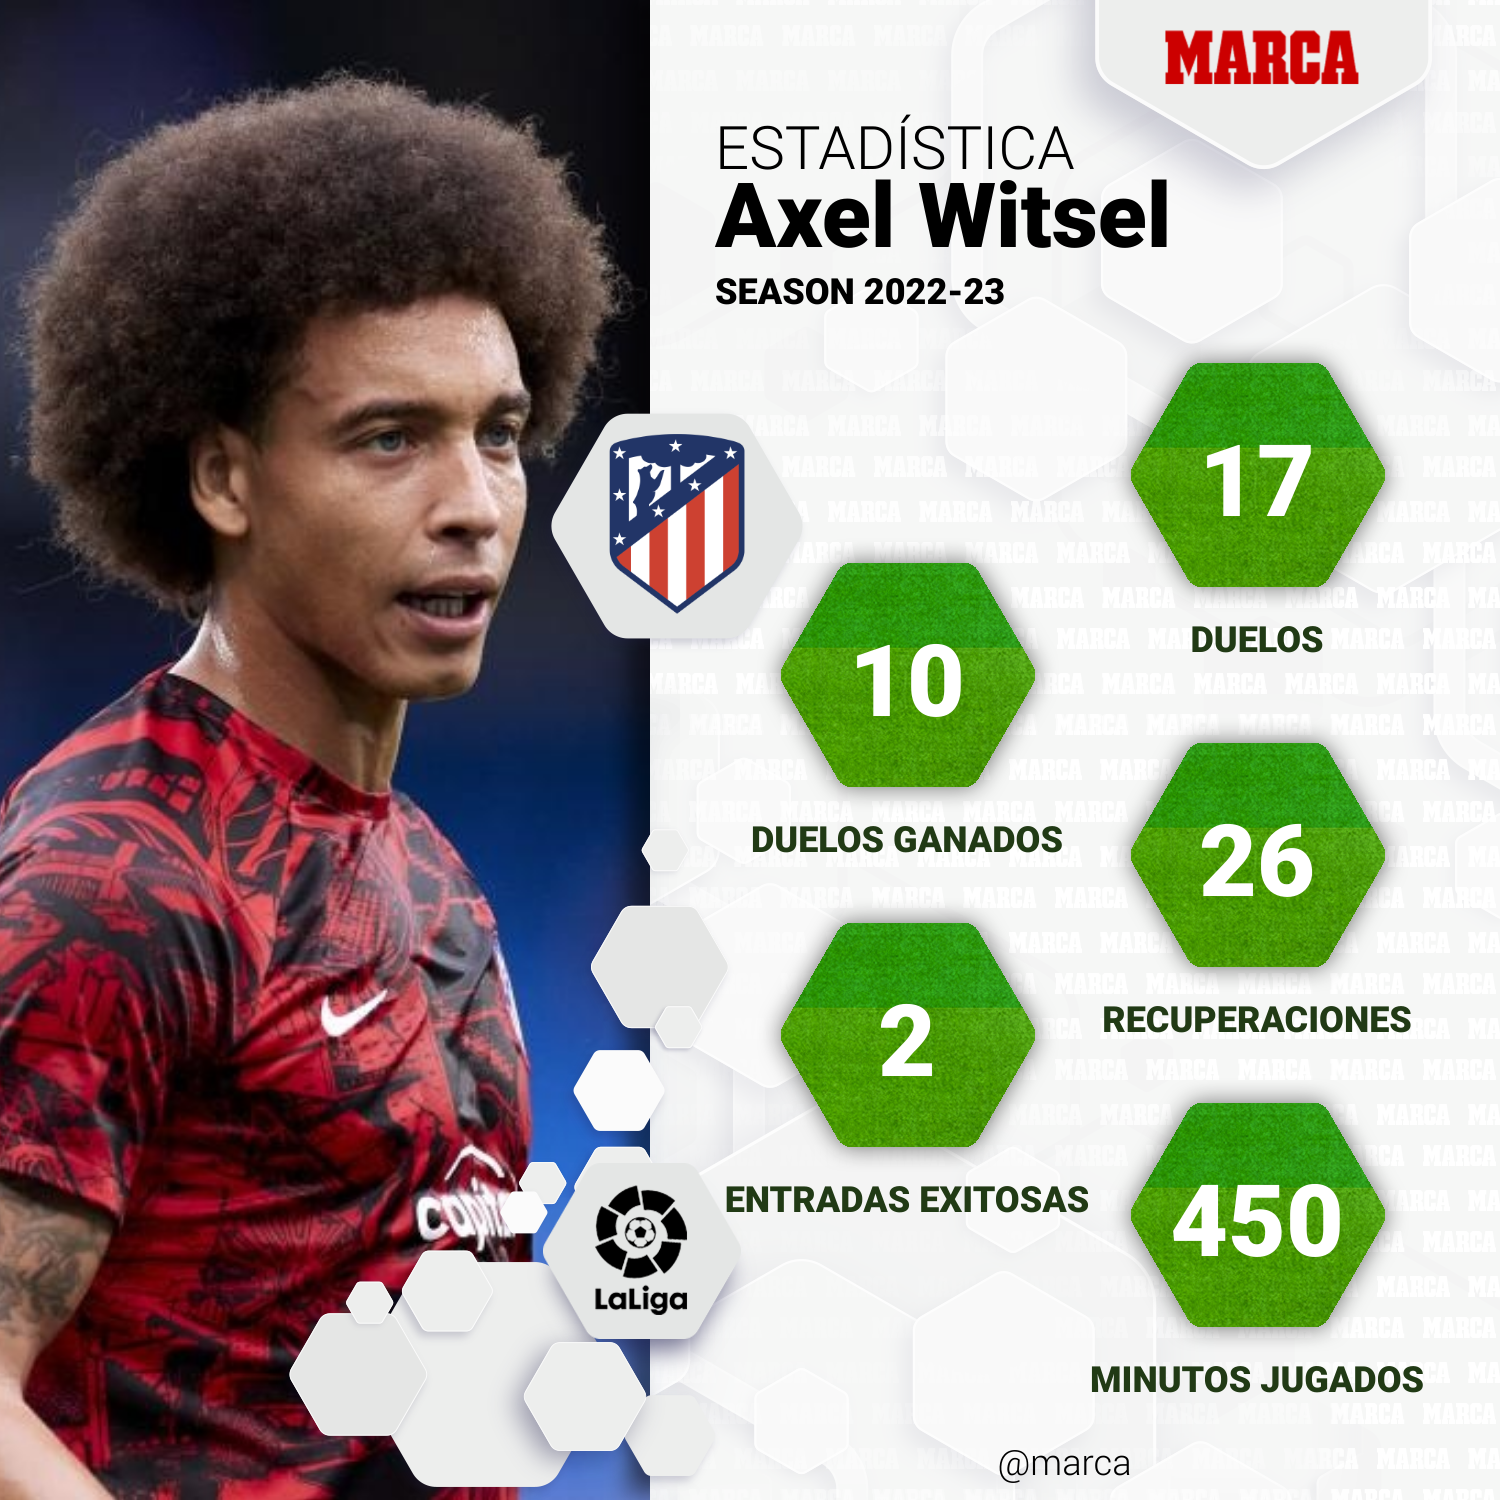 Axel witsel equipos actuales